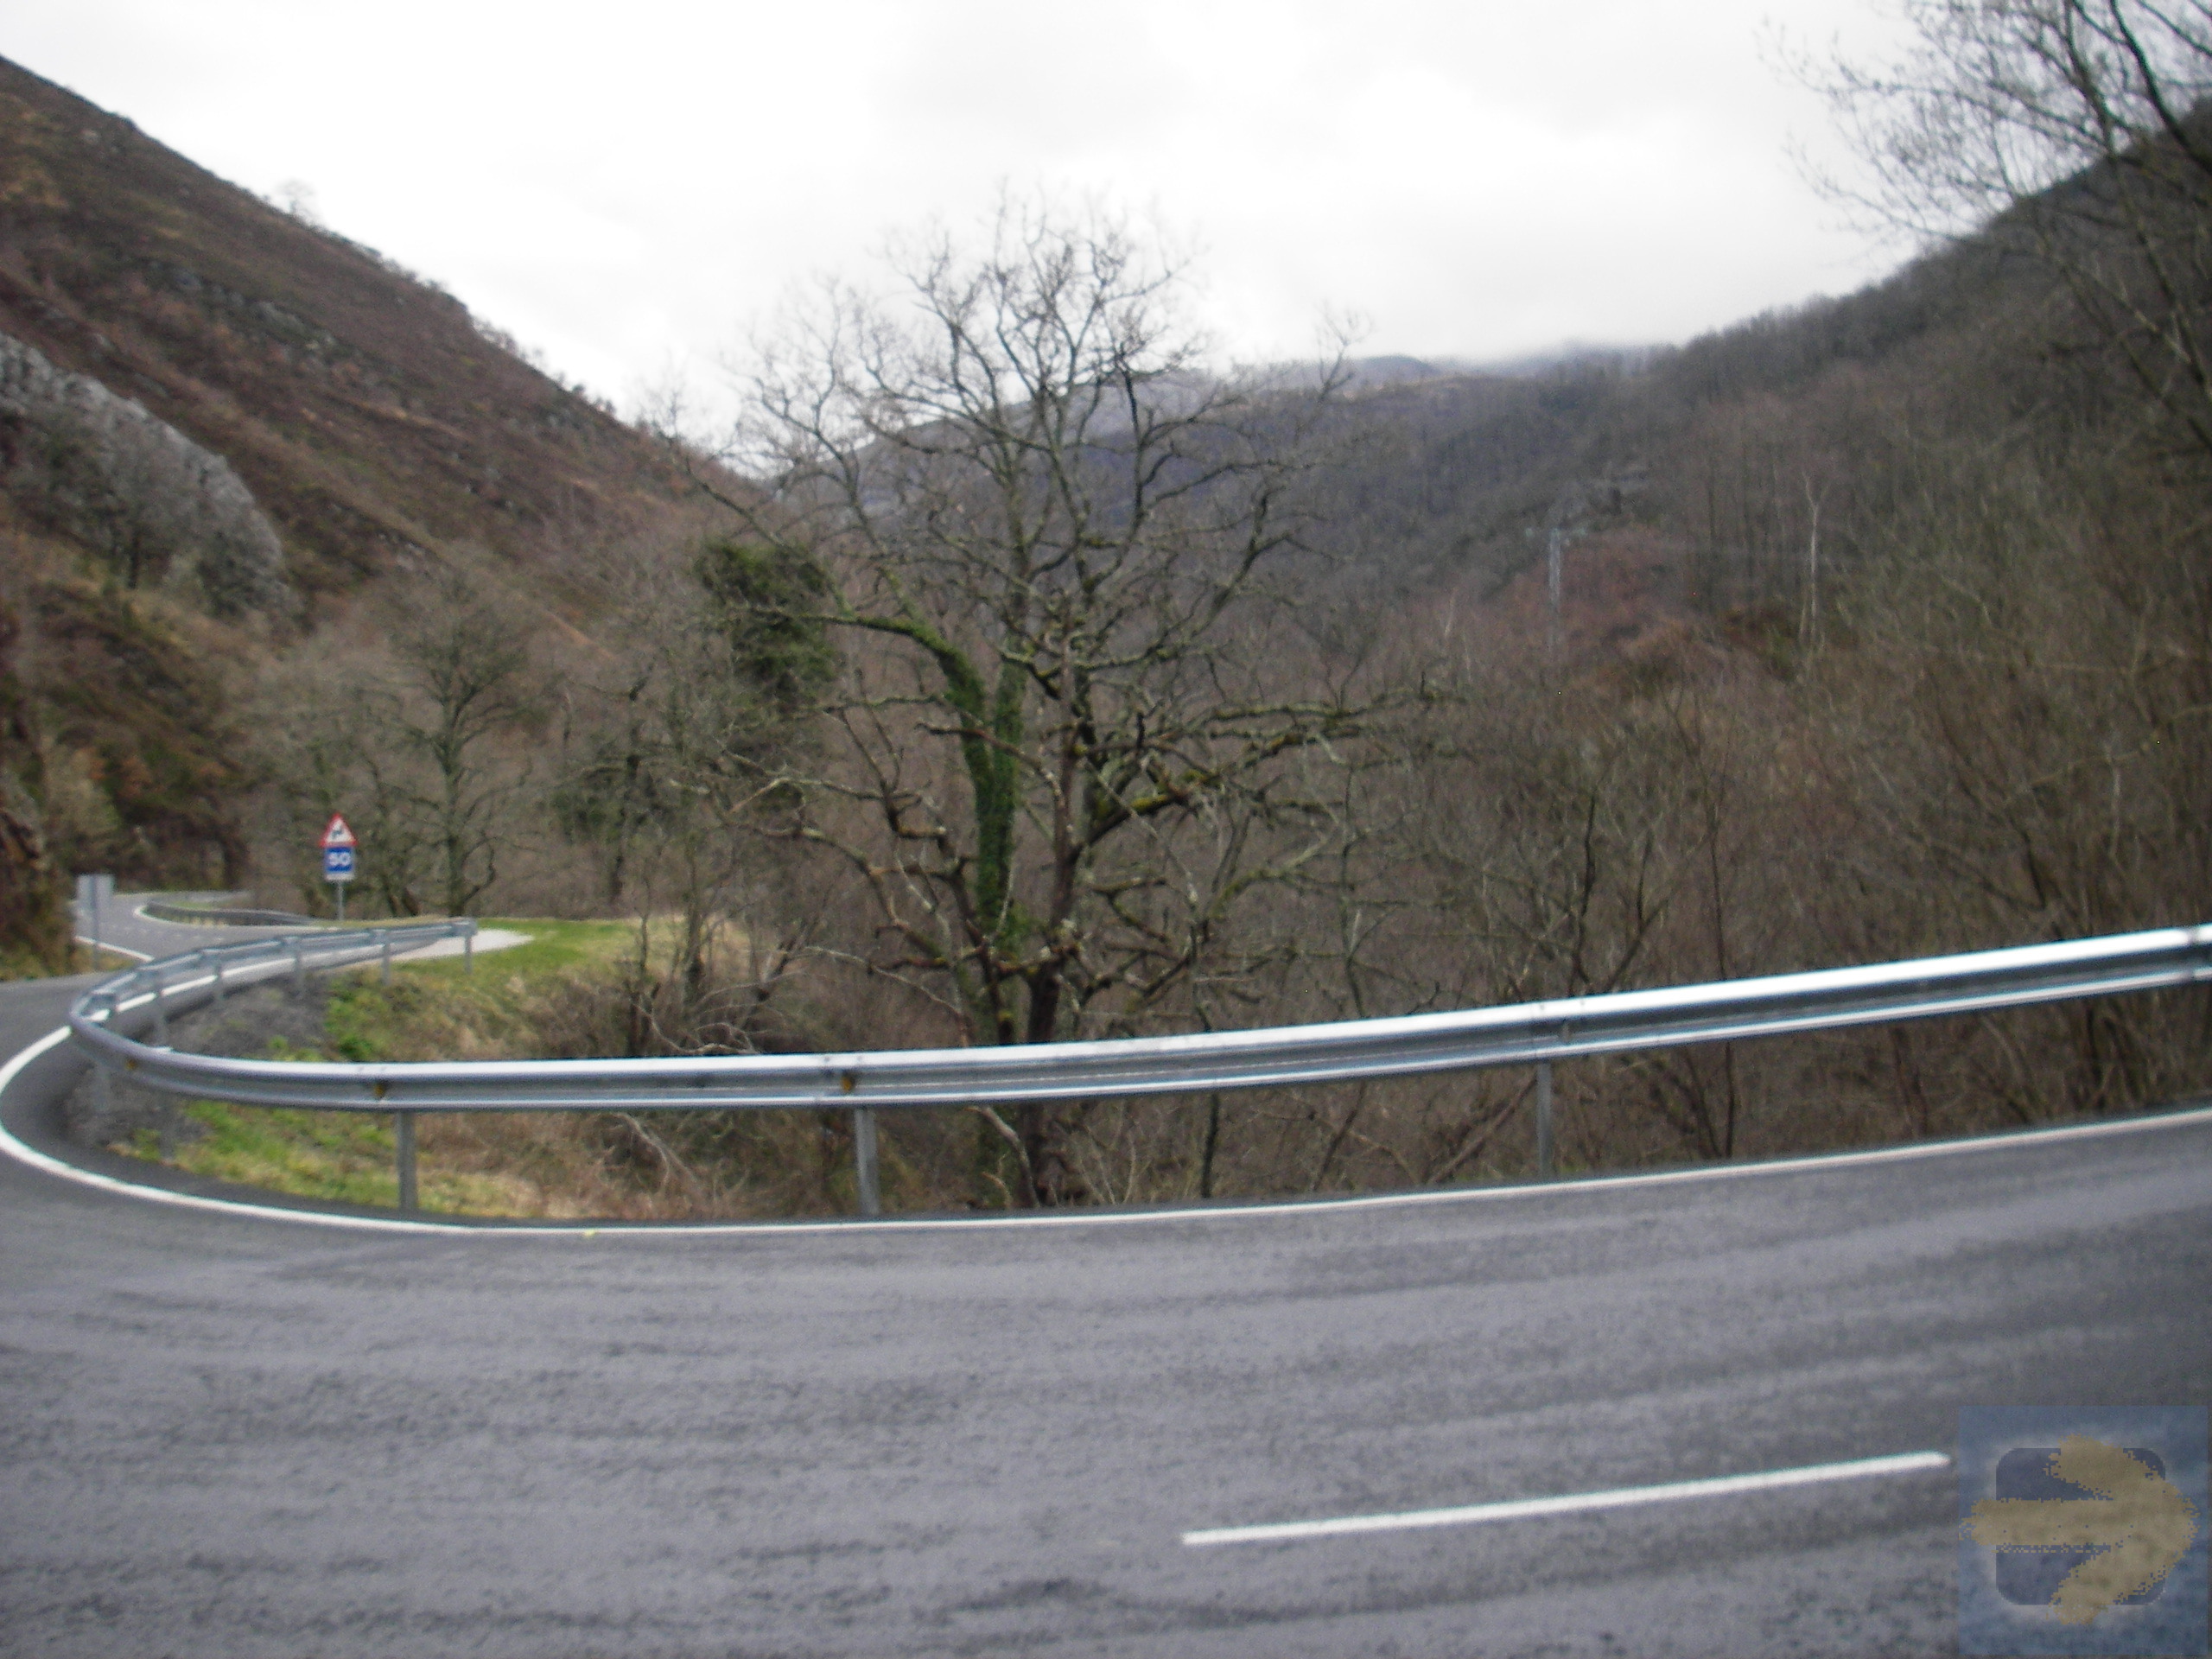 Paved road to Roncesvalles, after Valcarlos